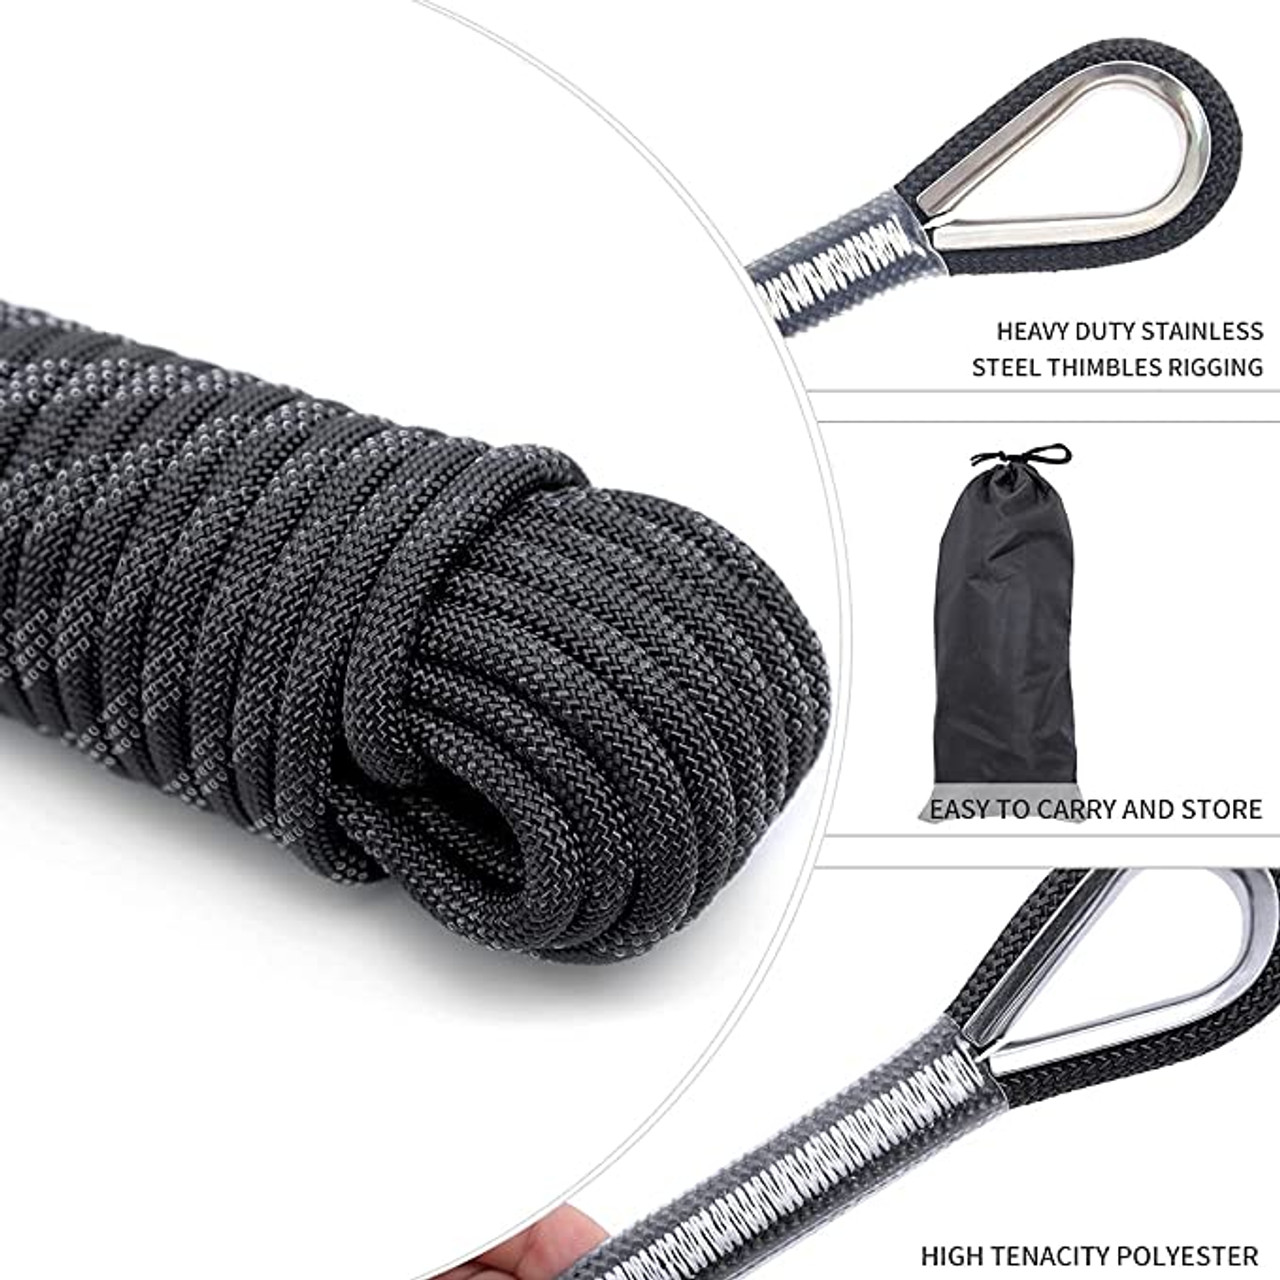 Climbing Technology - #TradeFair - News 2022 at VERTICAL PRO Our 2022 news  for #climbing and #mountaineering, TUNER I is an I-shaped adjustable  lanyard made of dynamic rope, ideal in every mountain